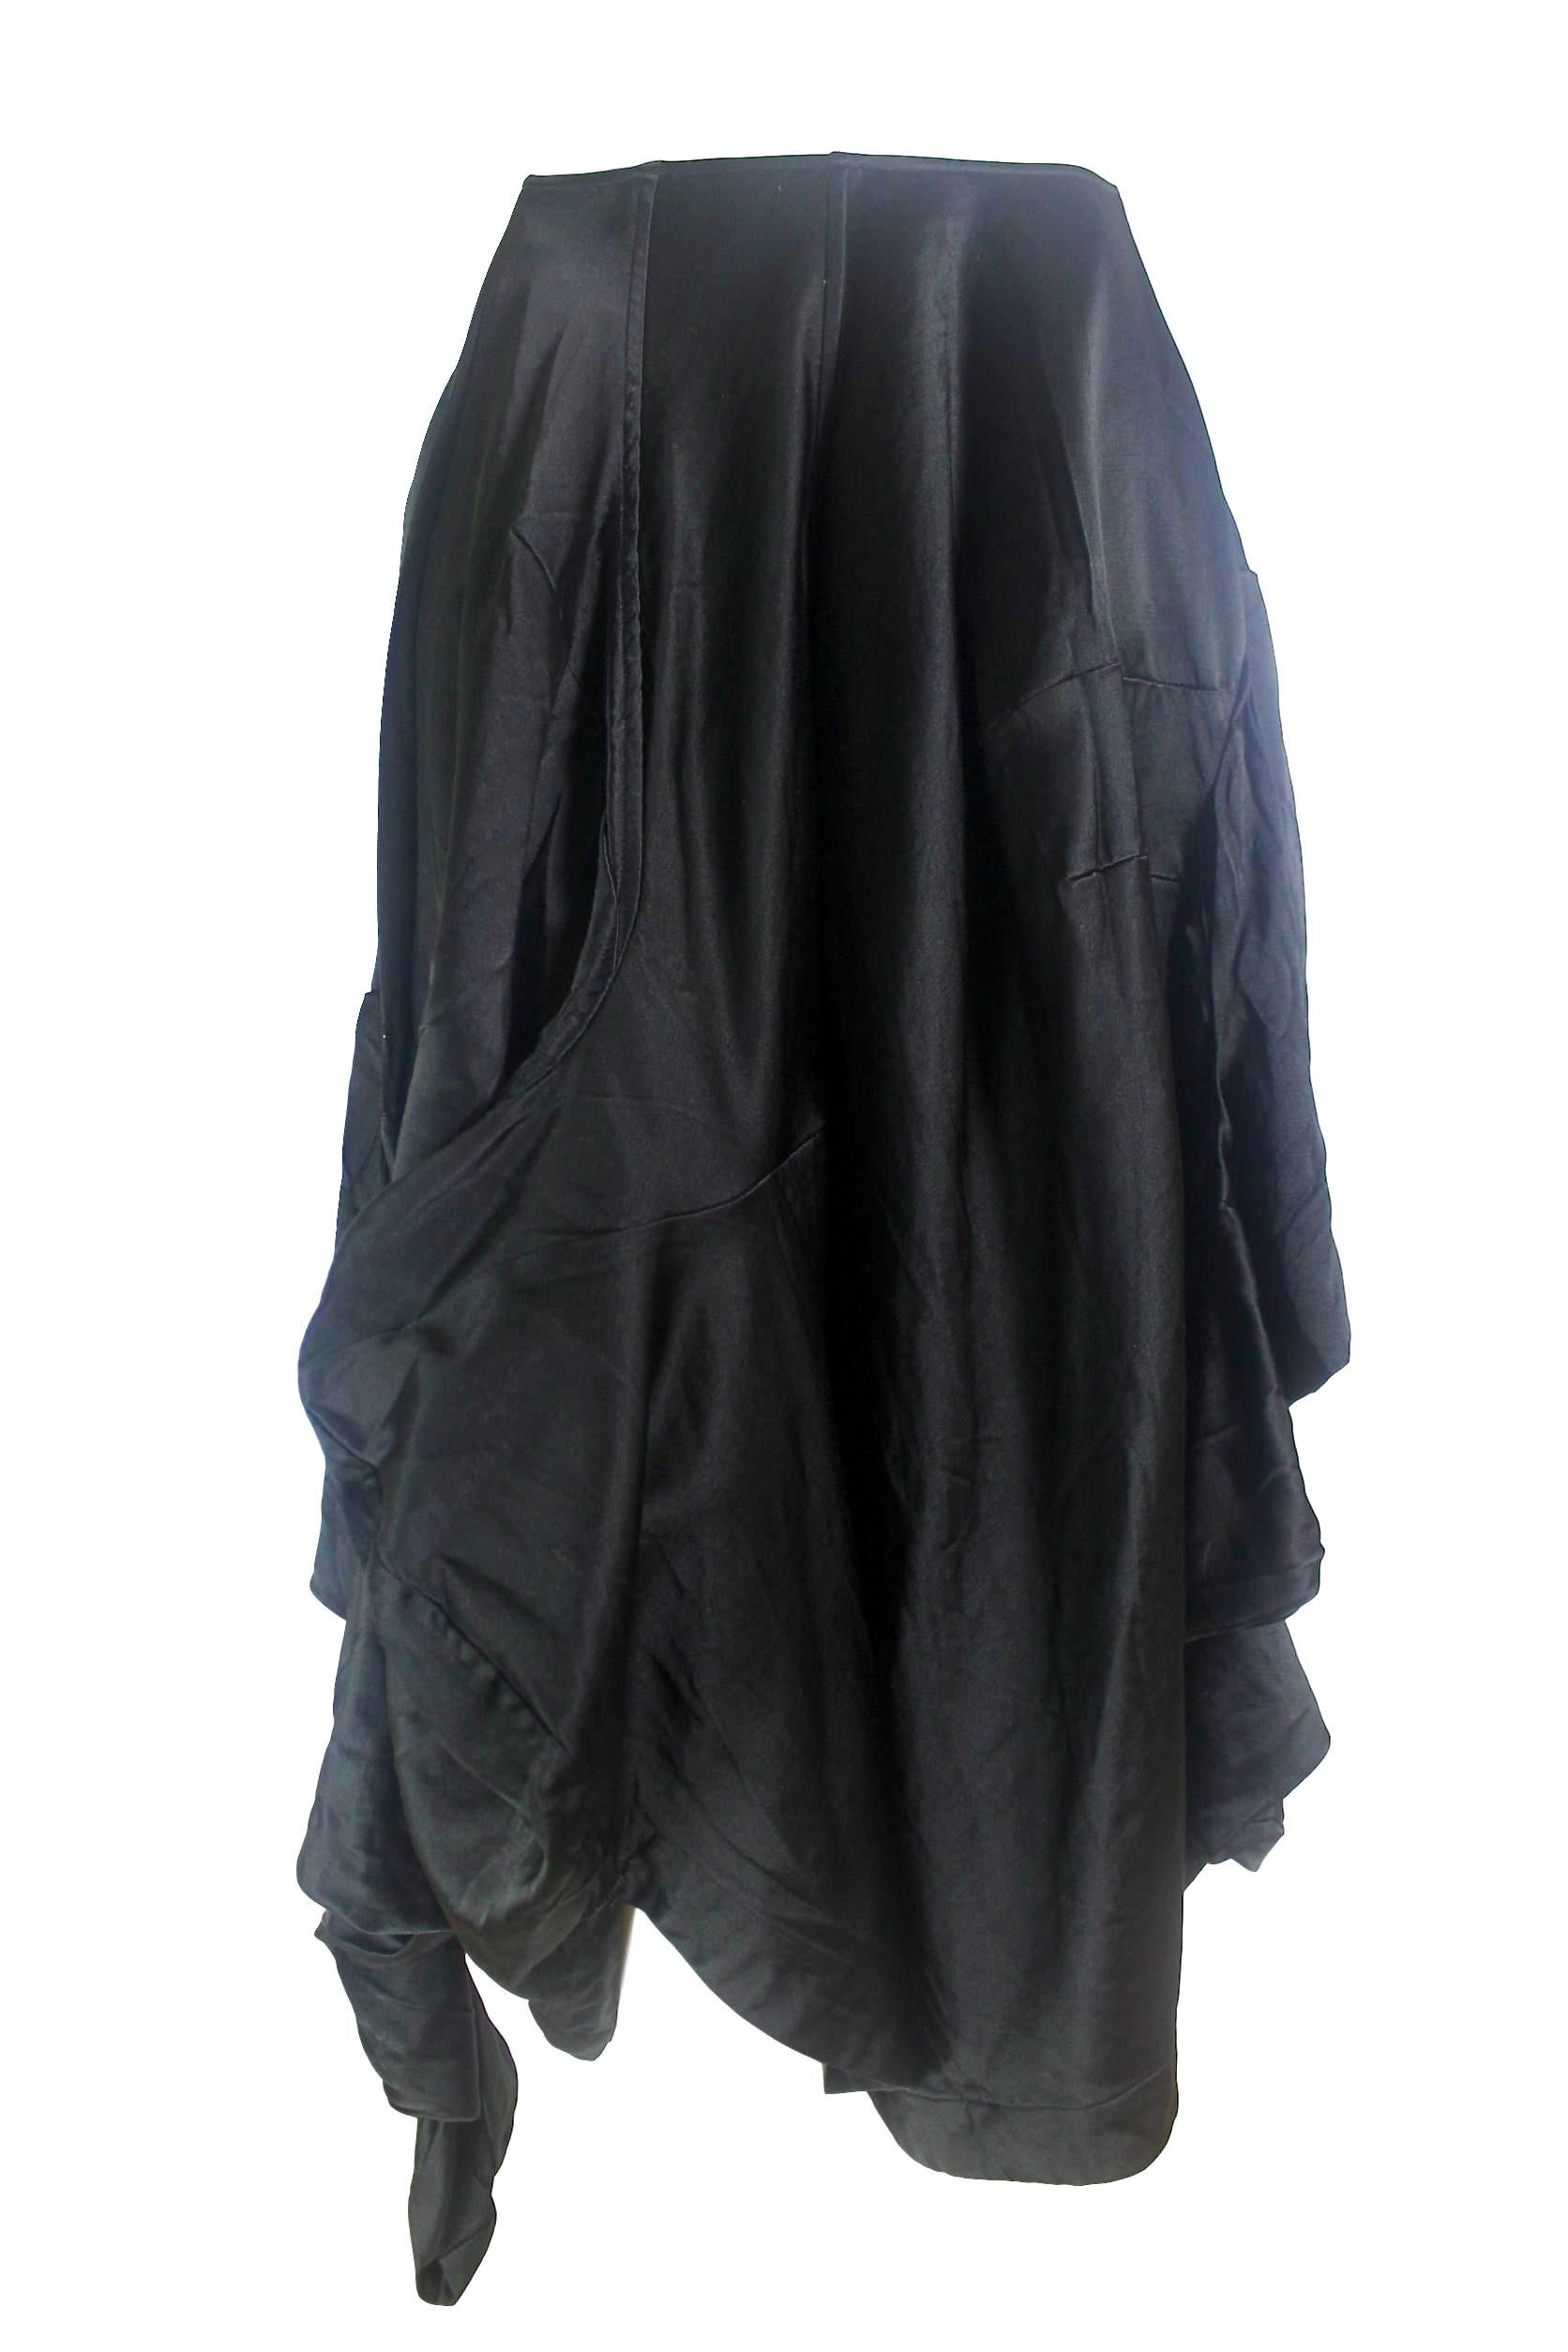 Black Comme des Garcons Wool/Silk Twisted Sleeve Skirt AD 2004 Dark Romance For Sale